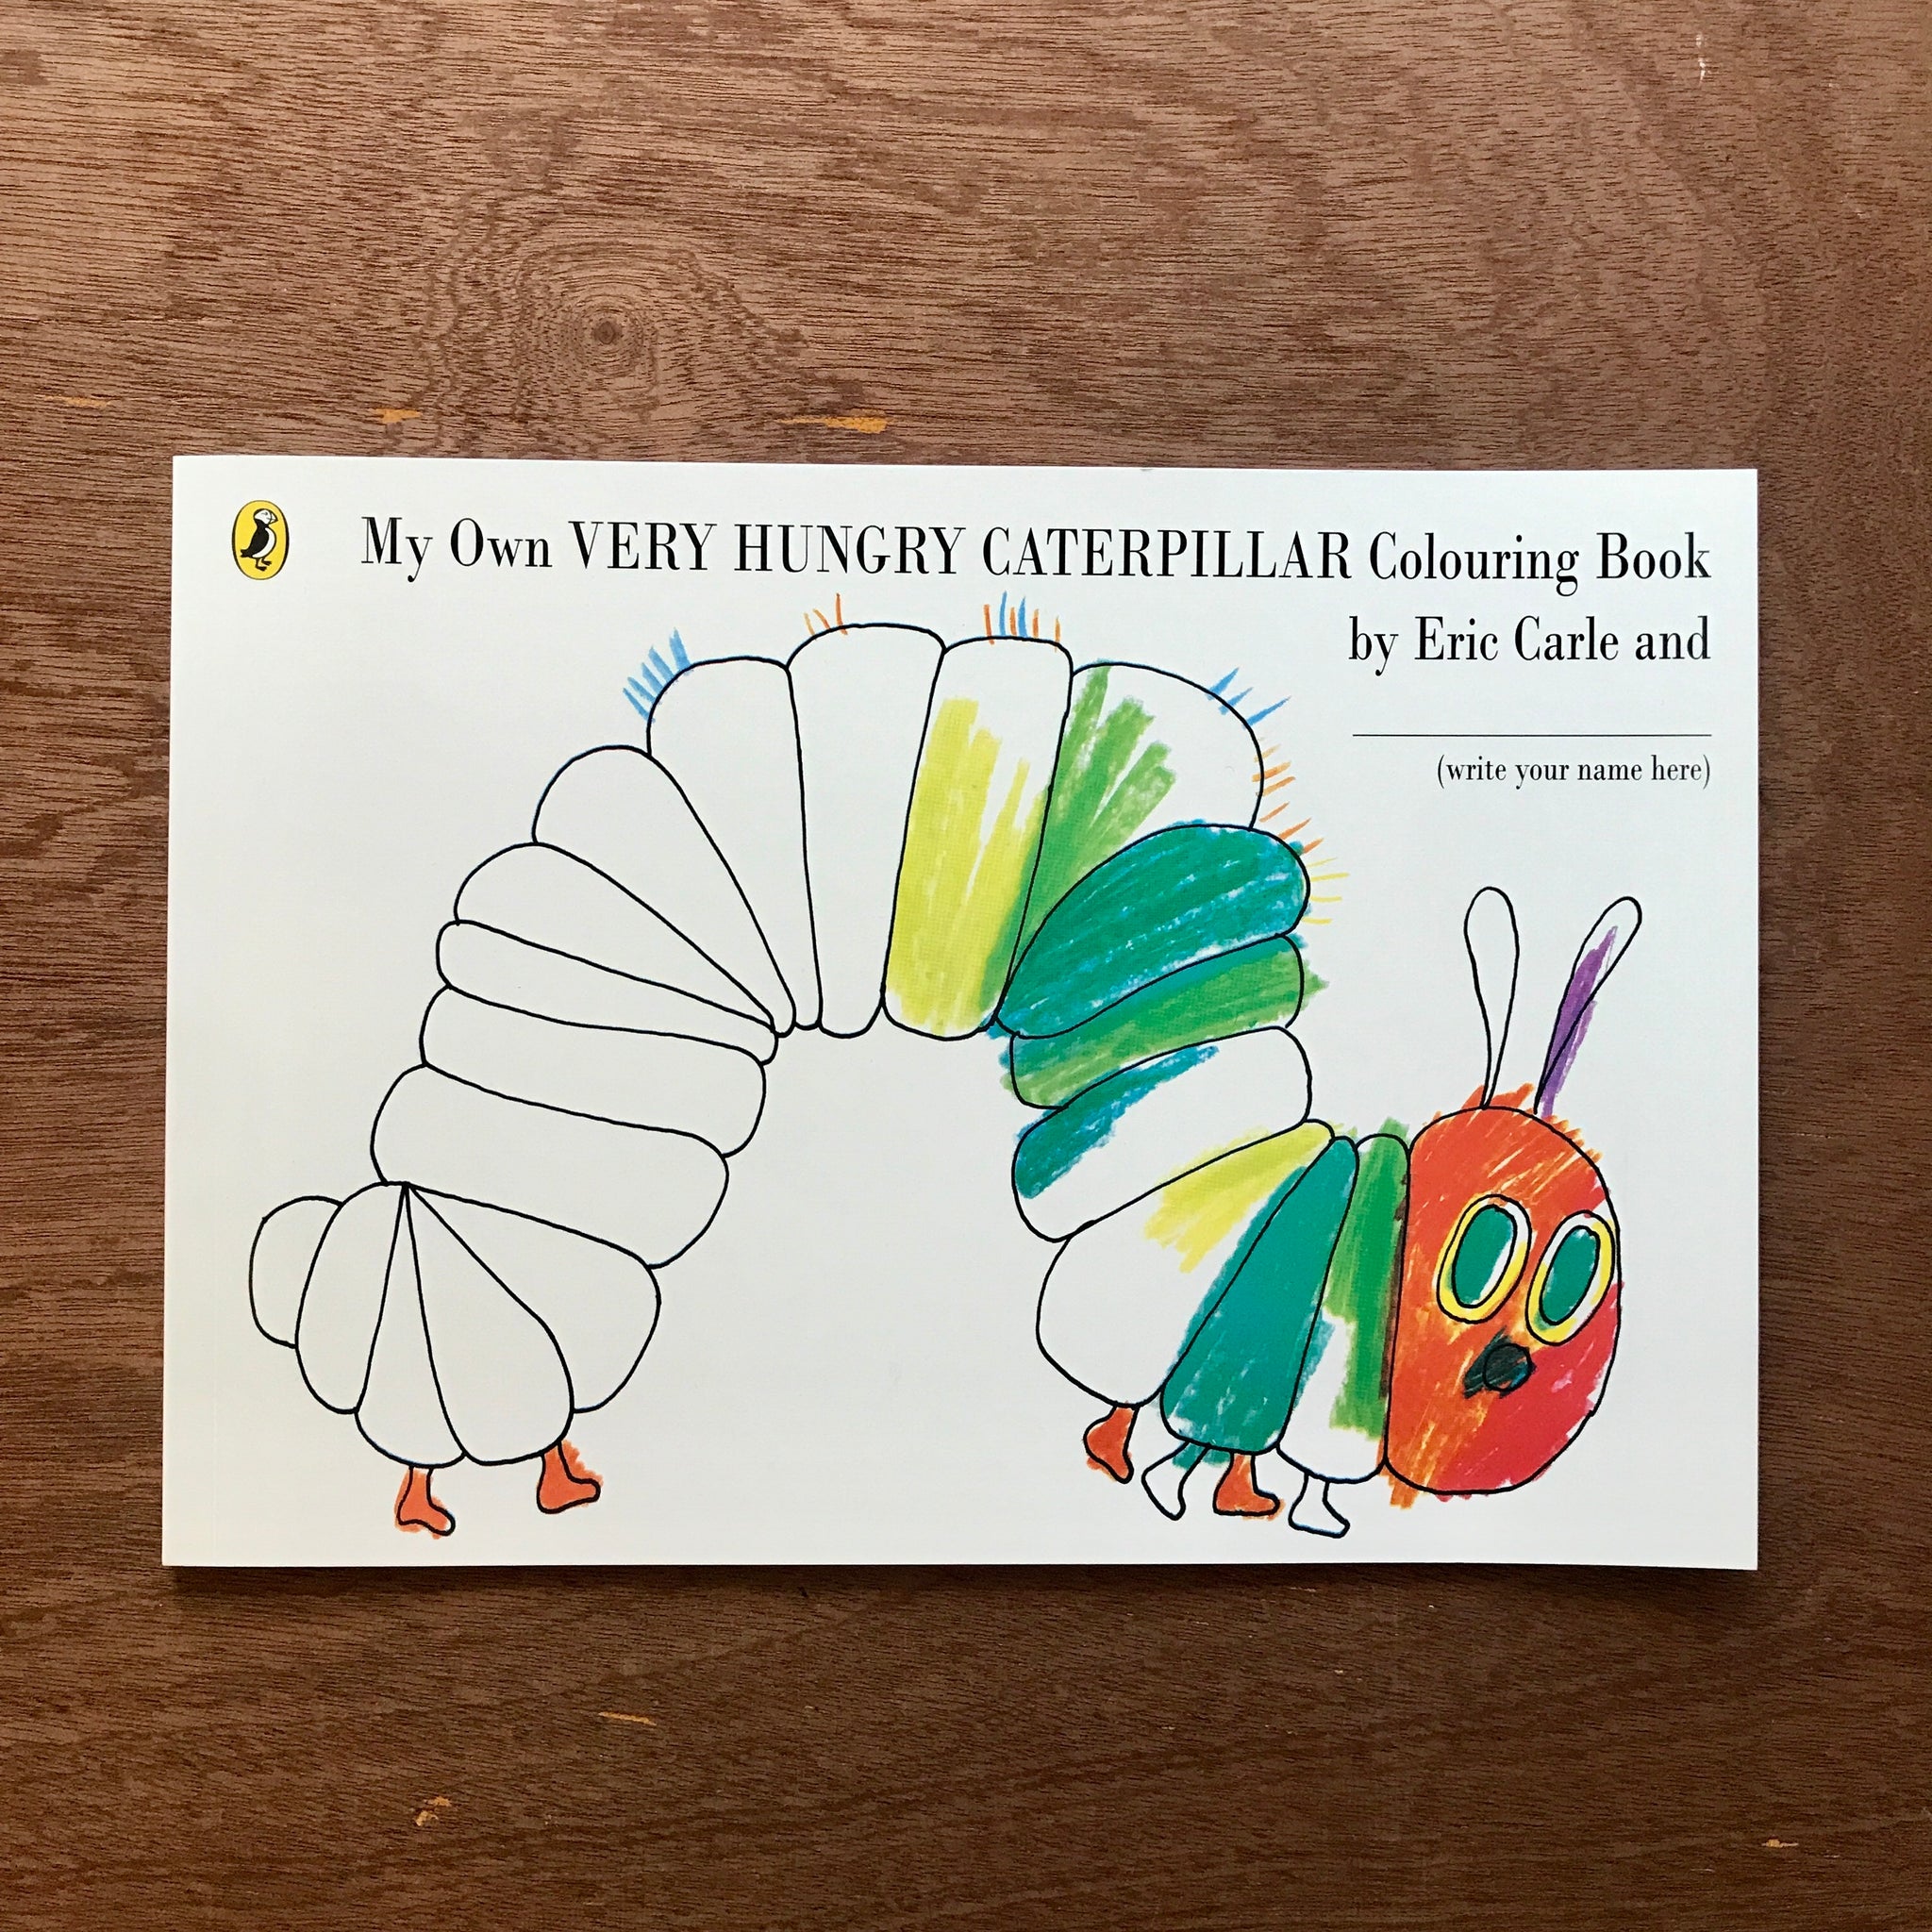 Rare　–　Book　Caterpillar　Colouring　Hungry　Very　Mags